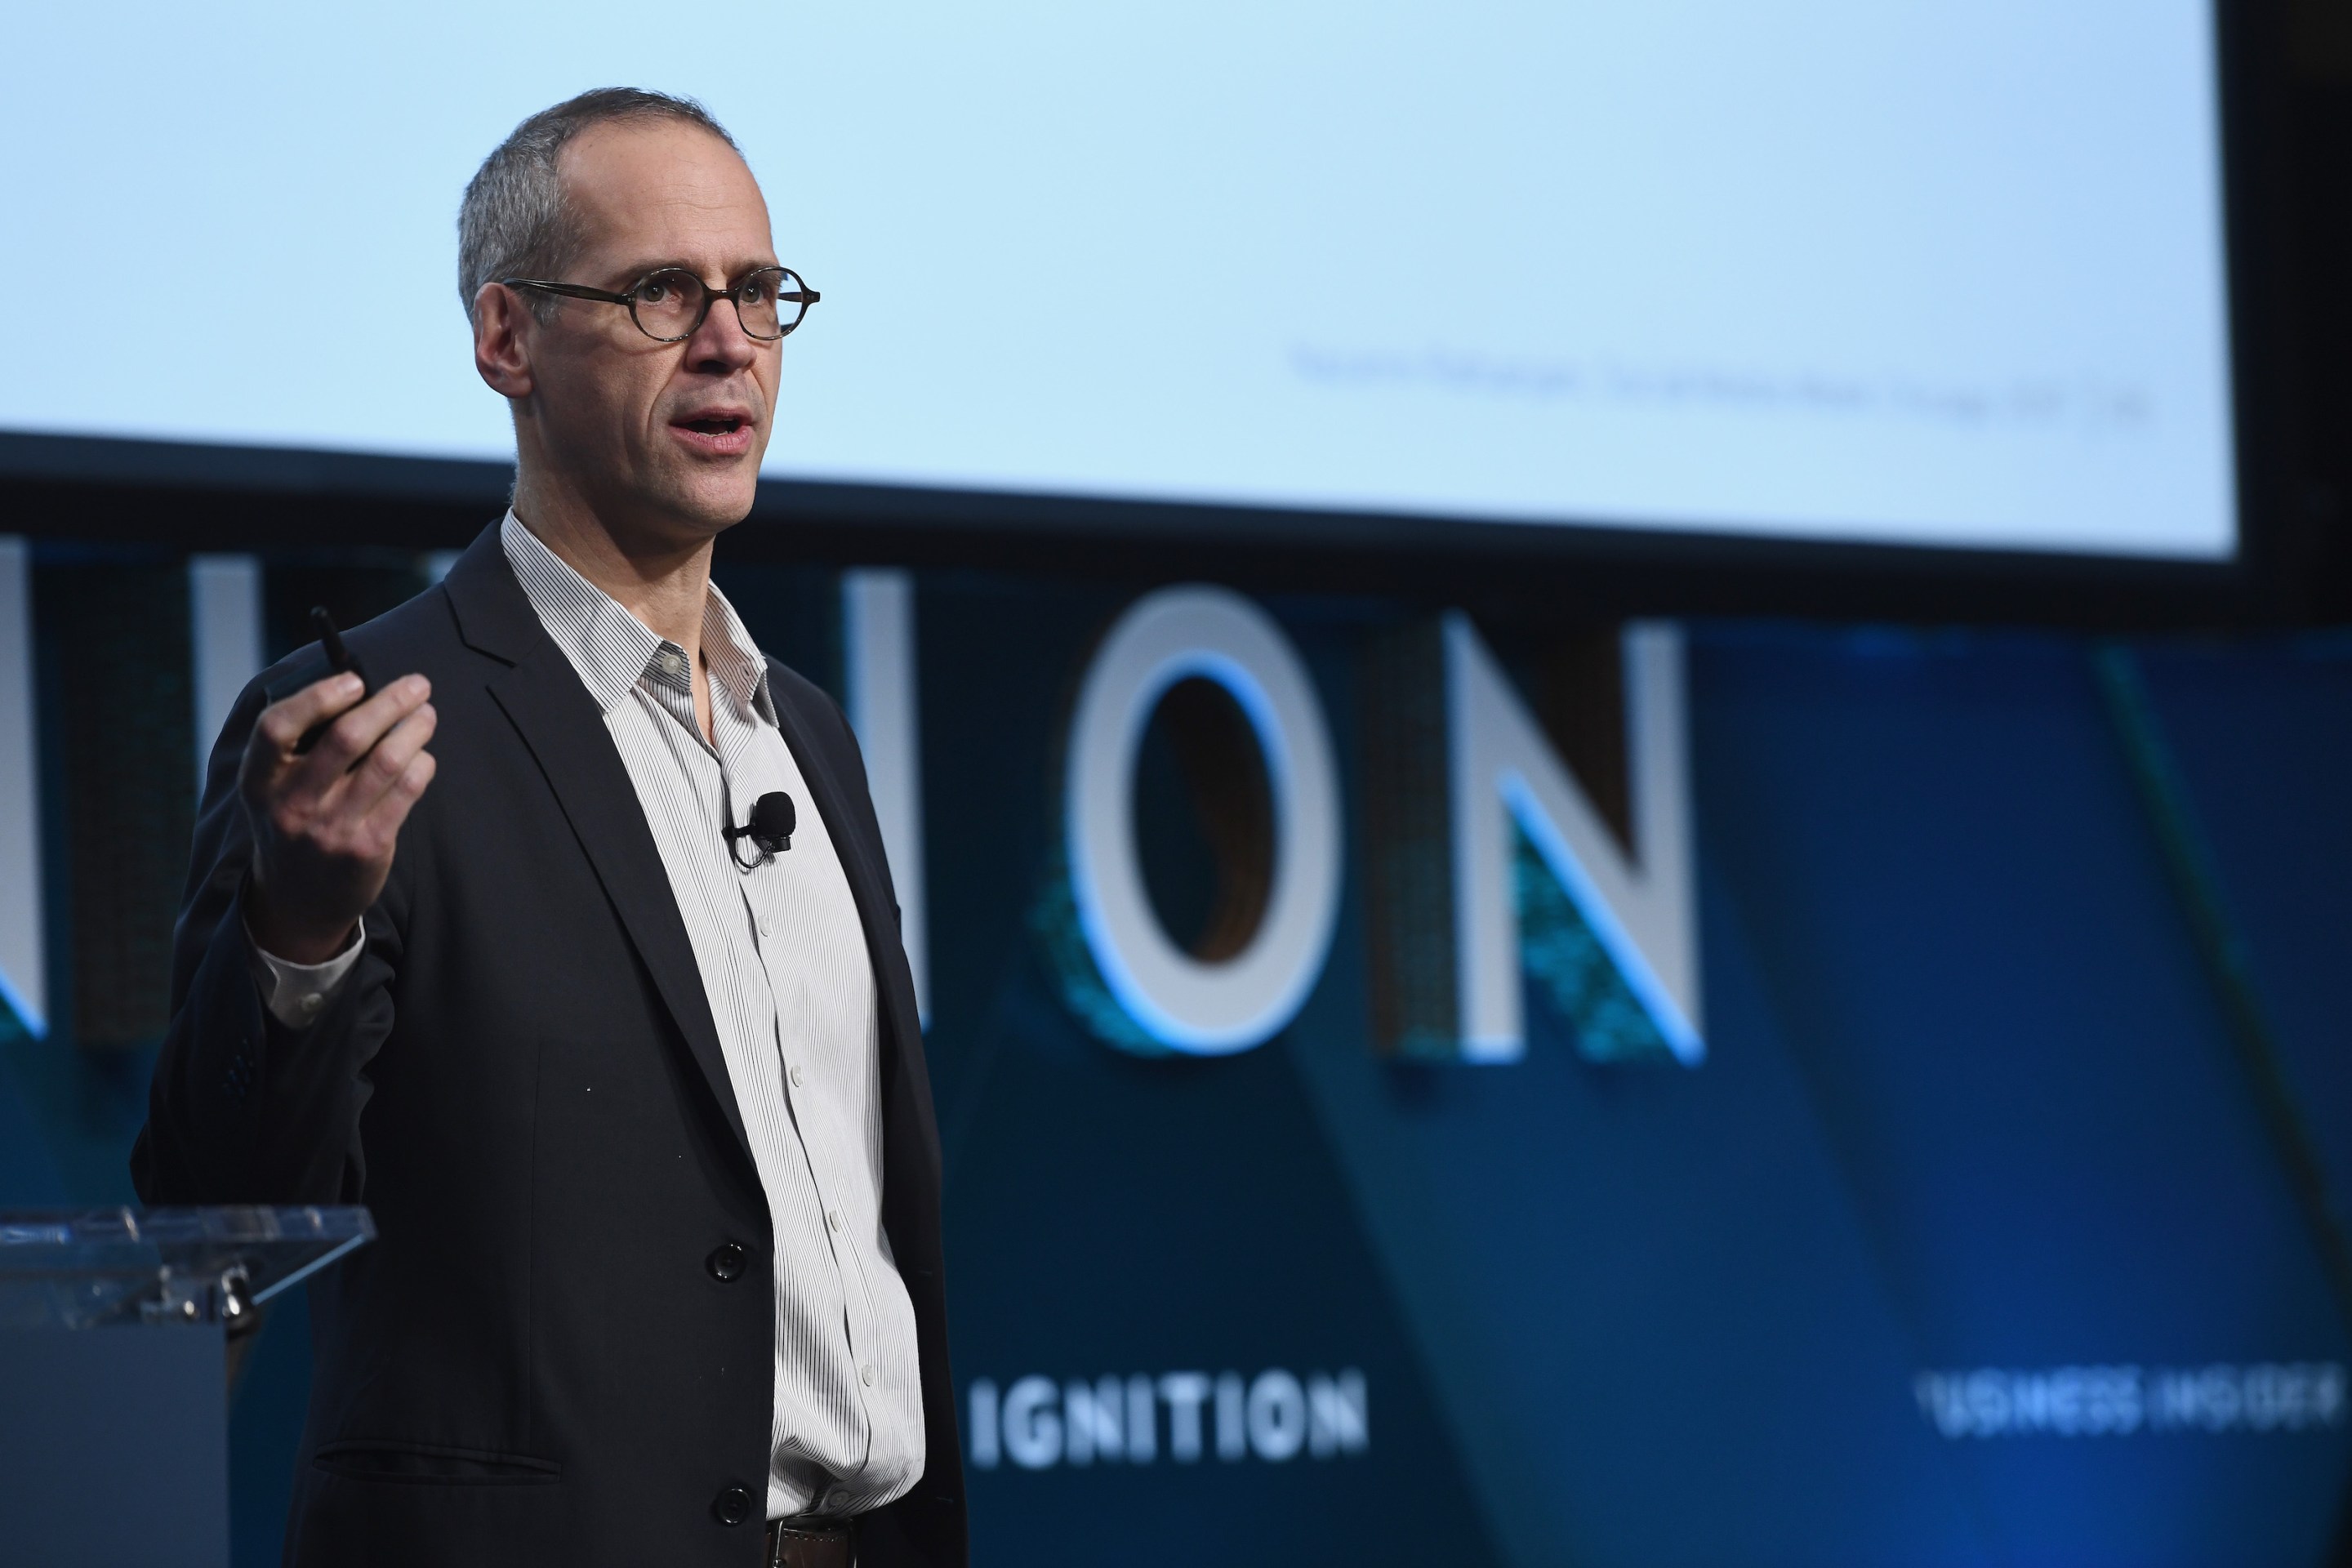 Gimlet Media co-founder Alex Blumberg speaks at the Ignition: Future of Media conference in New York City, in 2017.